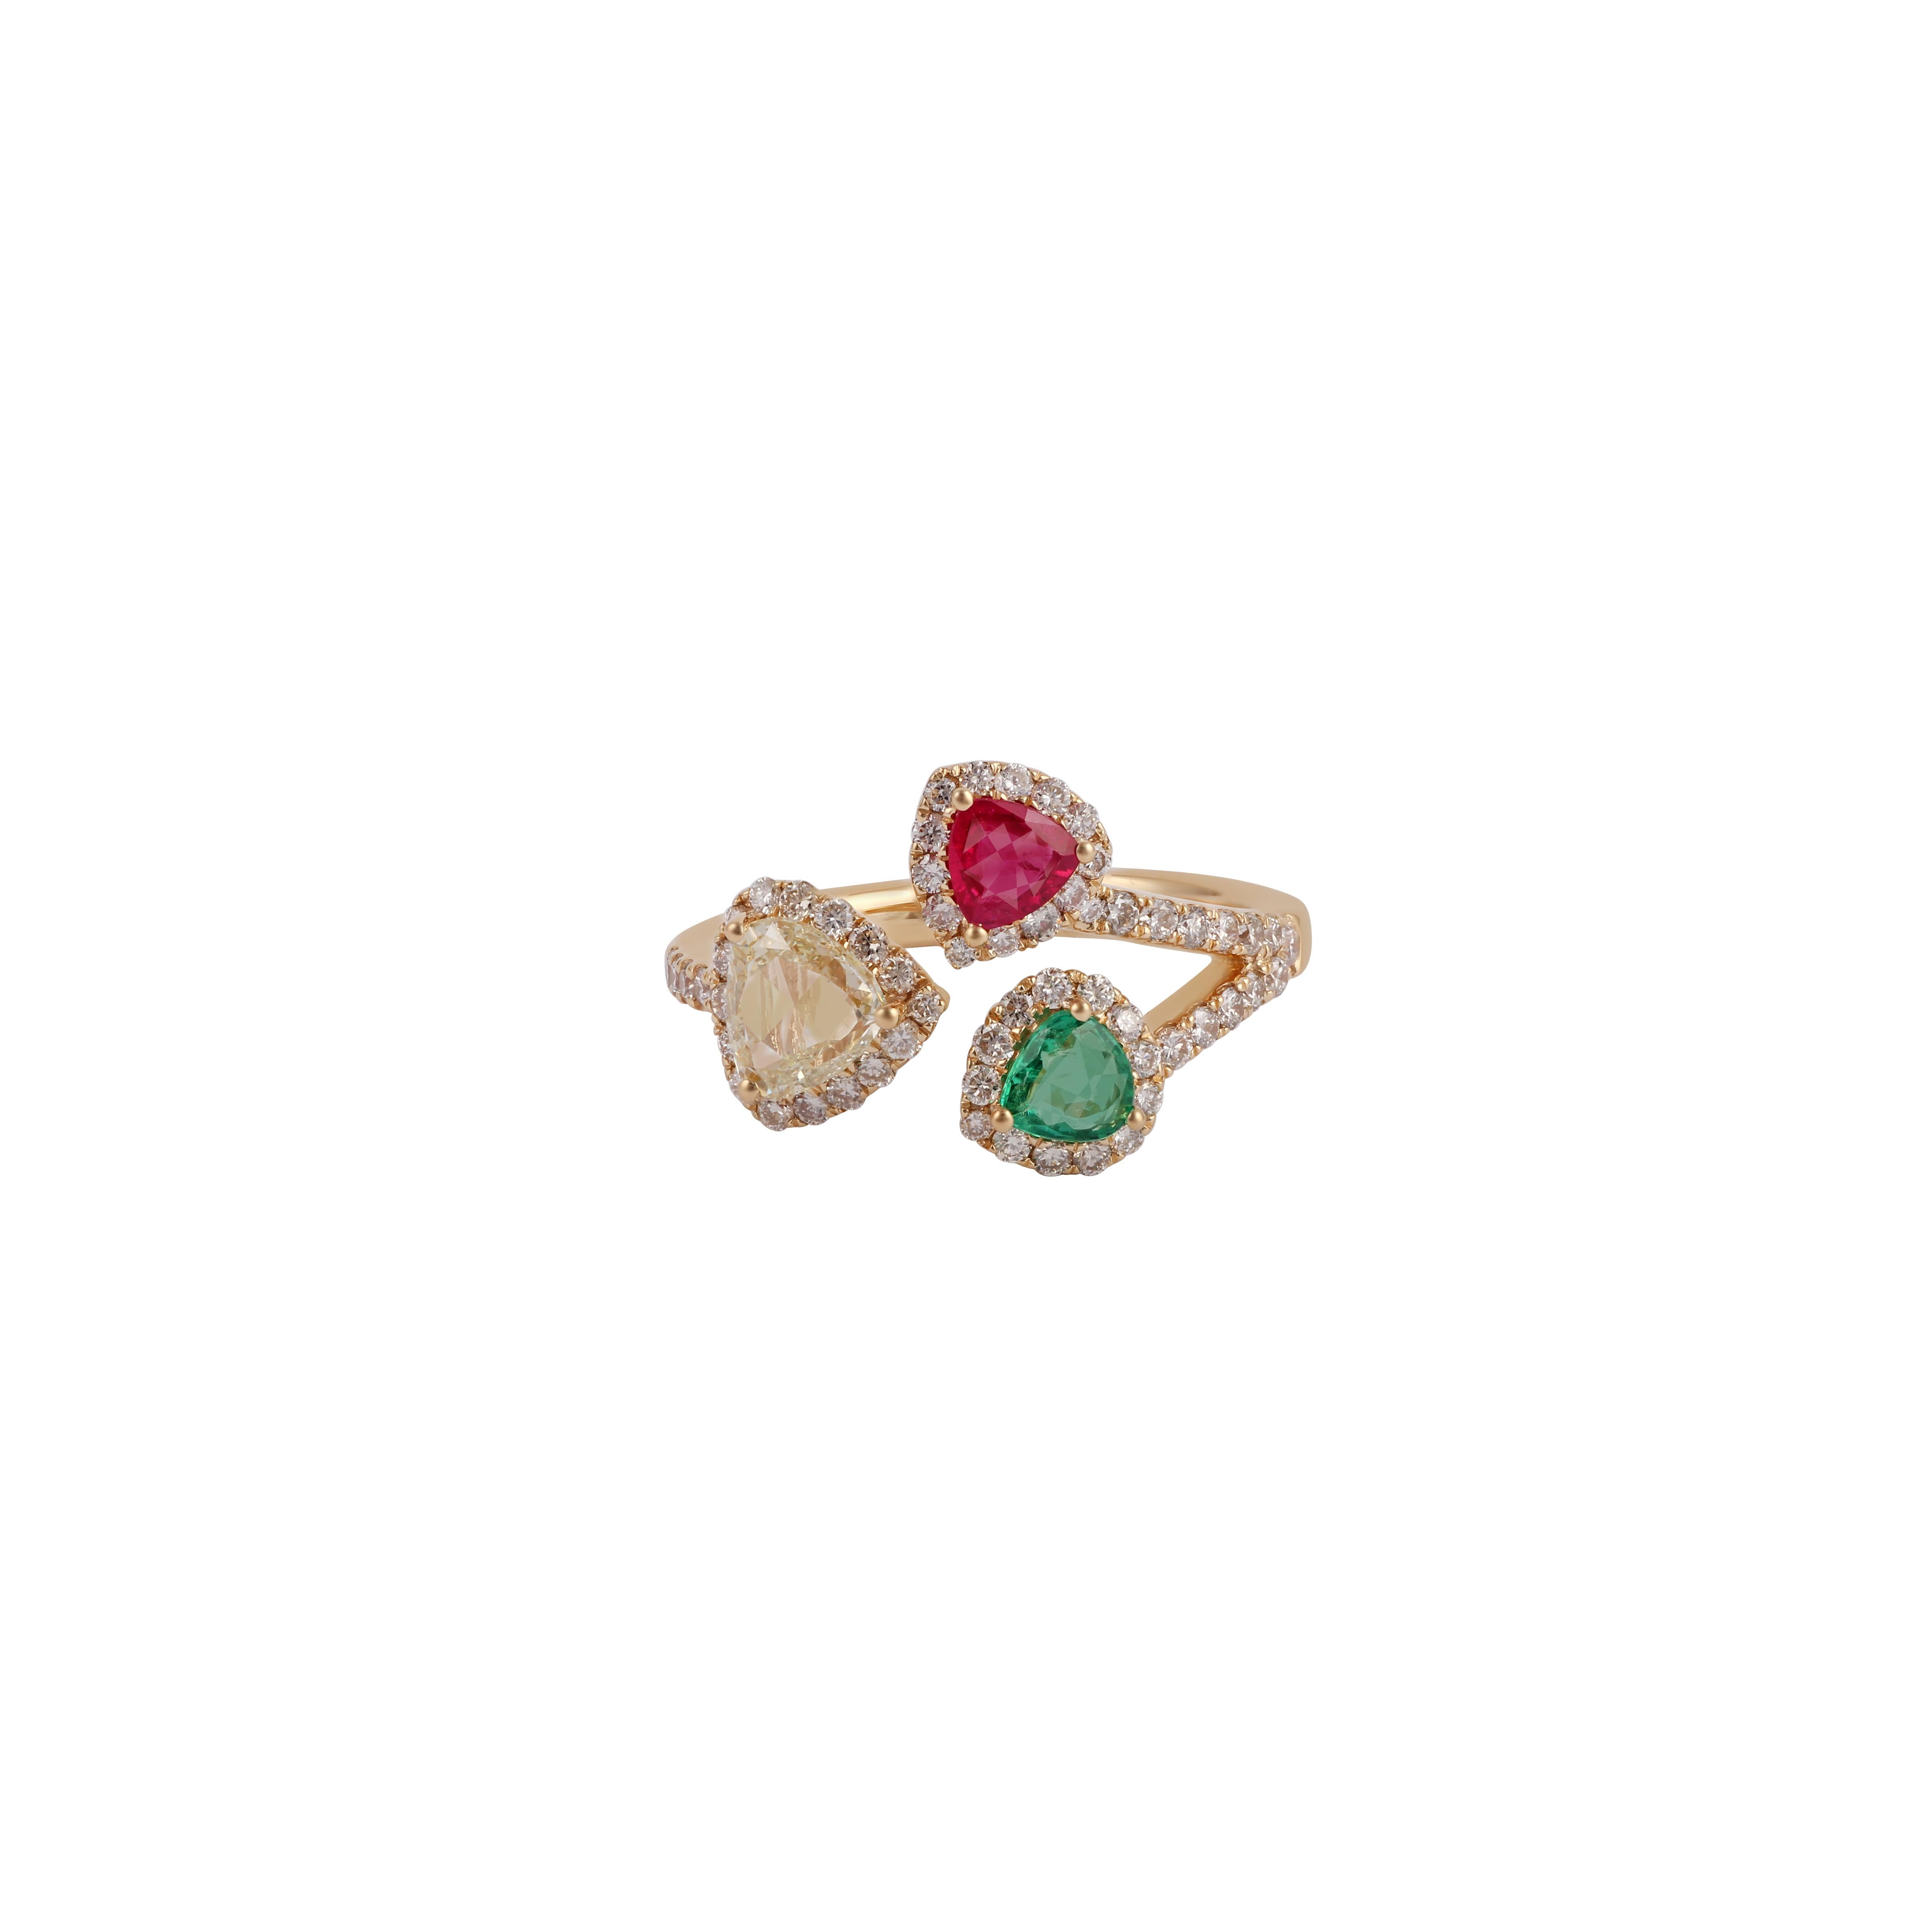 Its an elegant ring studded in 18k yellow gold with 1 piece trilliant shaped emerald weight 0.20 carat with 1 piece trilliant shaped ruby weight 0.26 carat & 1 piece trilliant shaped diamond weight 0.62 carat, this ring also contains 59 pieces round